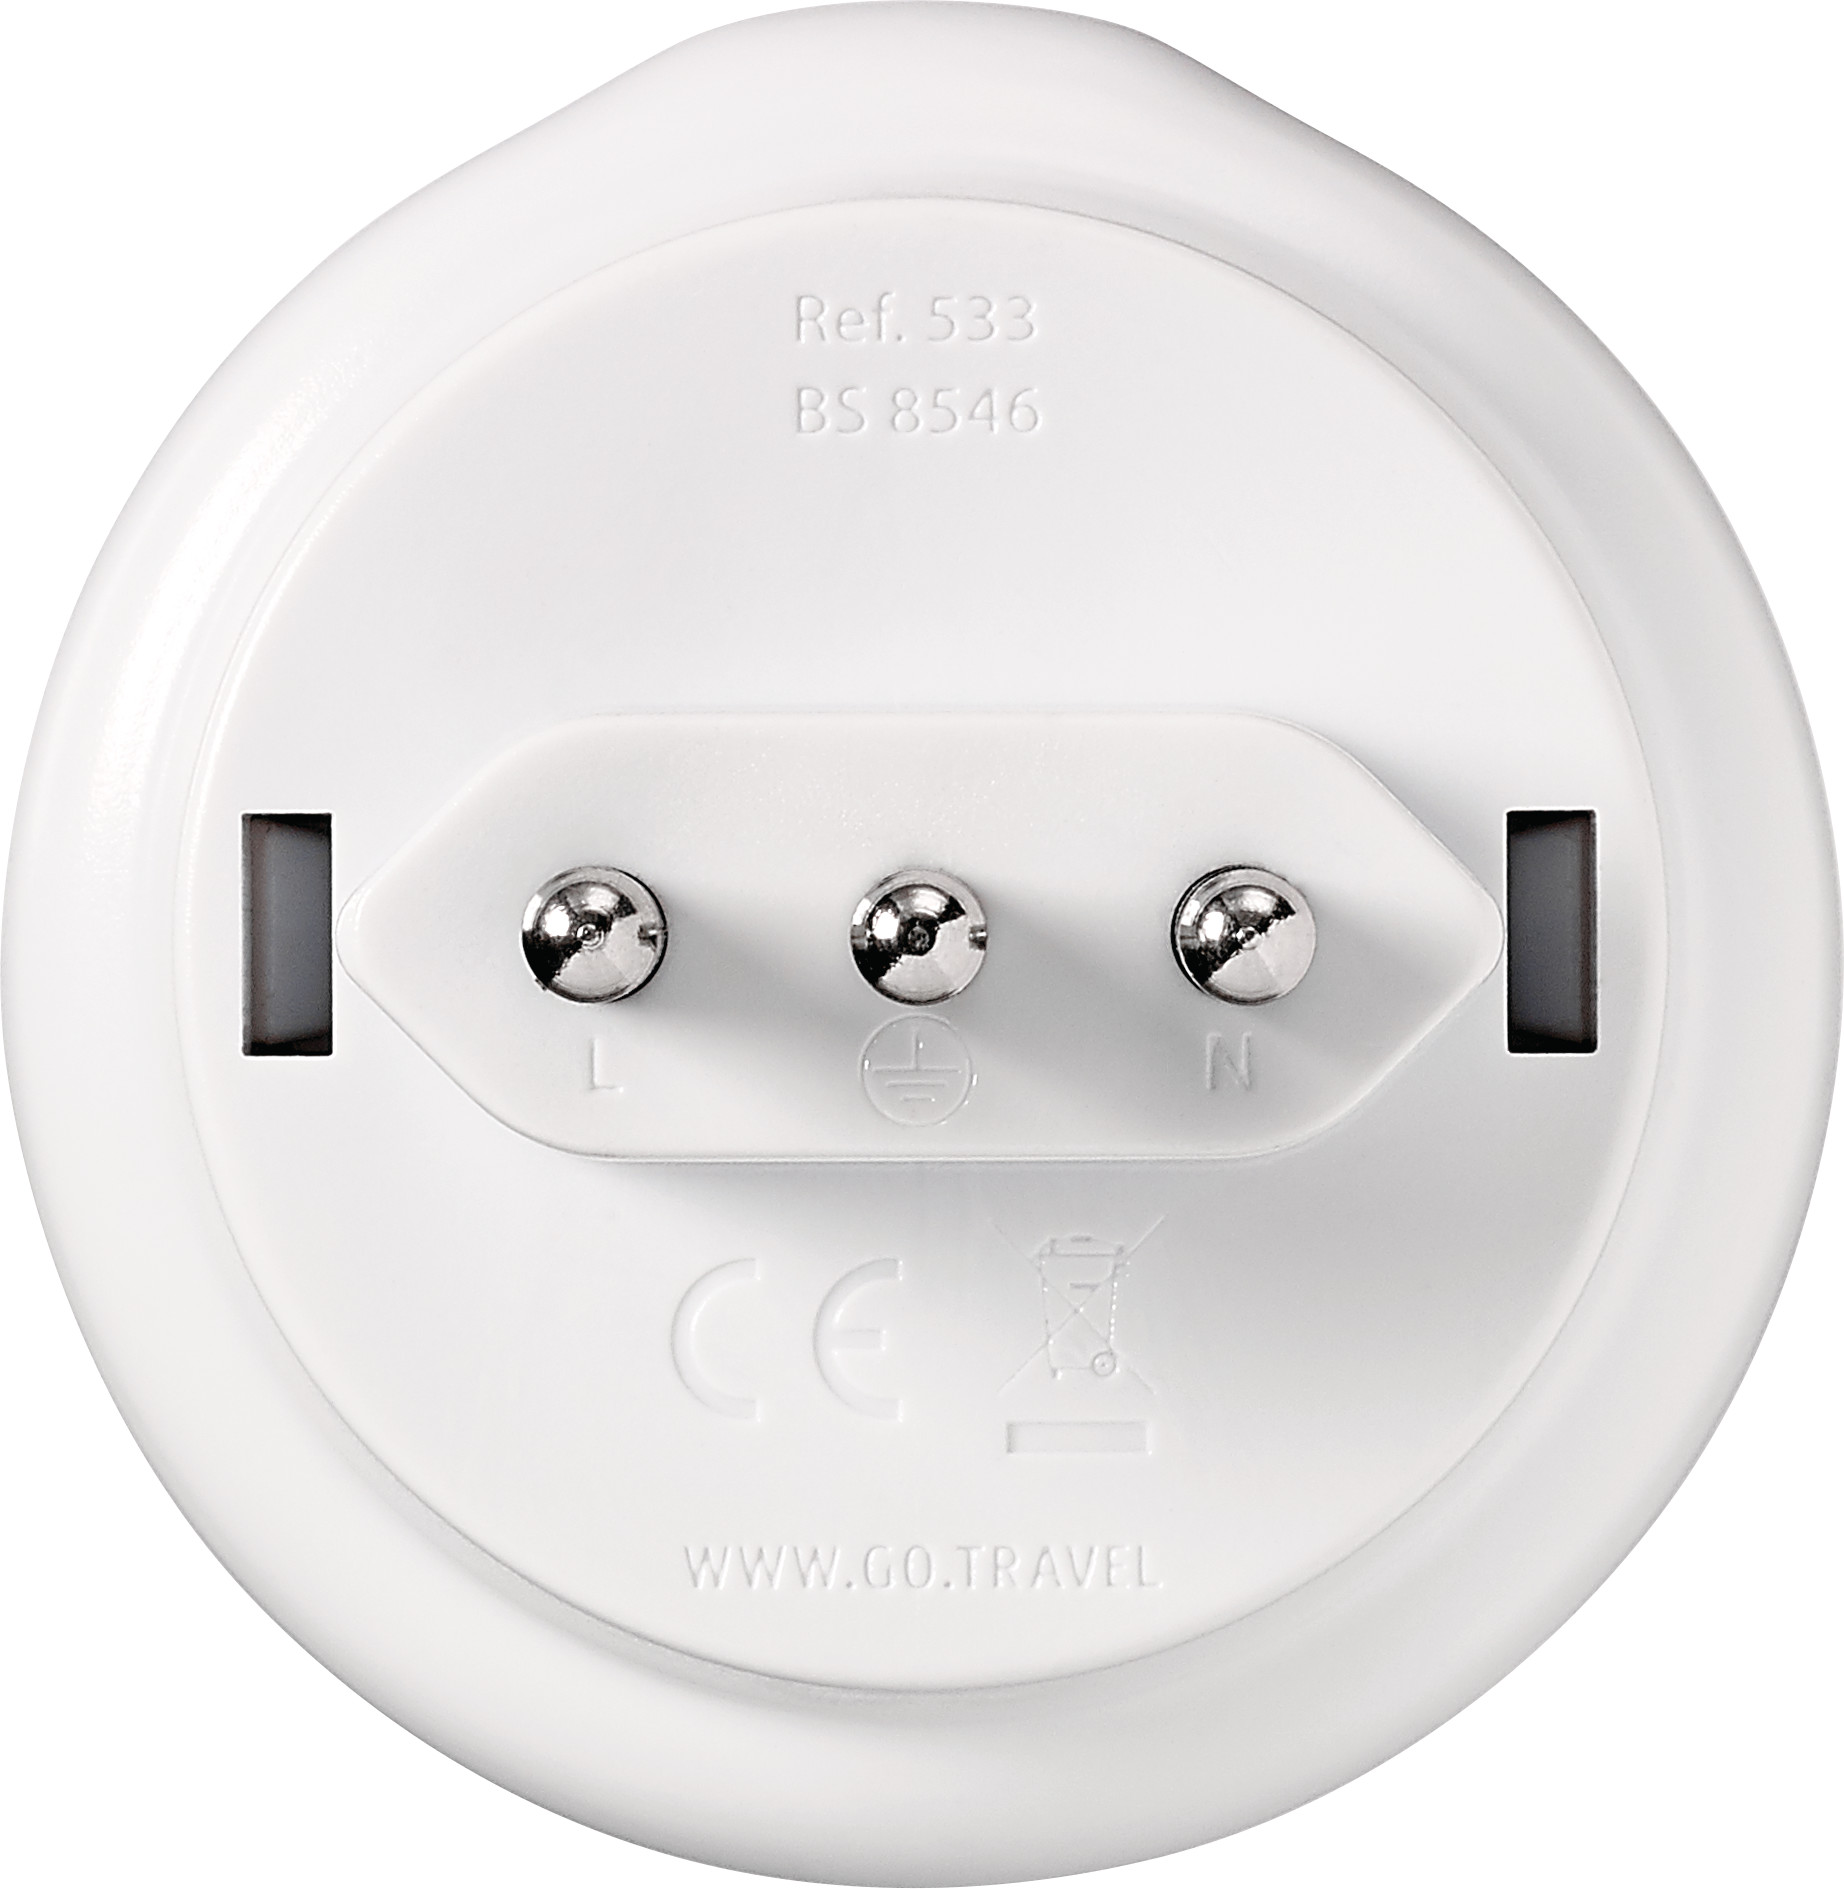 Picture of Go Travel UK Italy Adapter